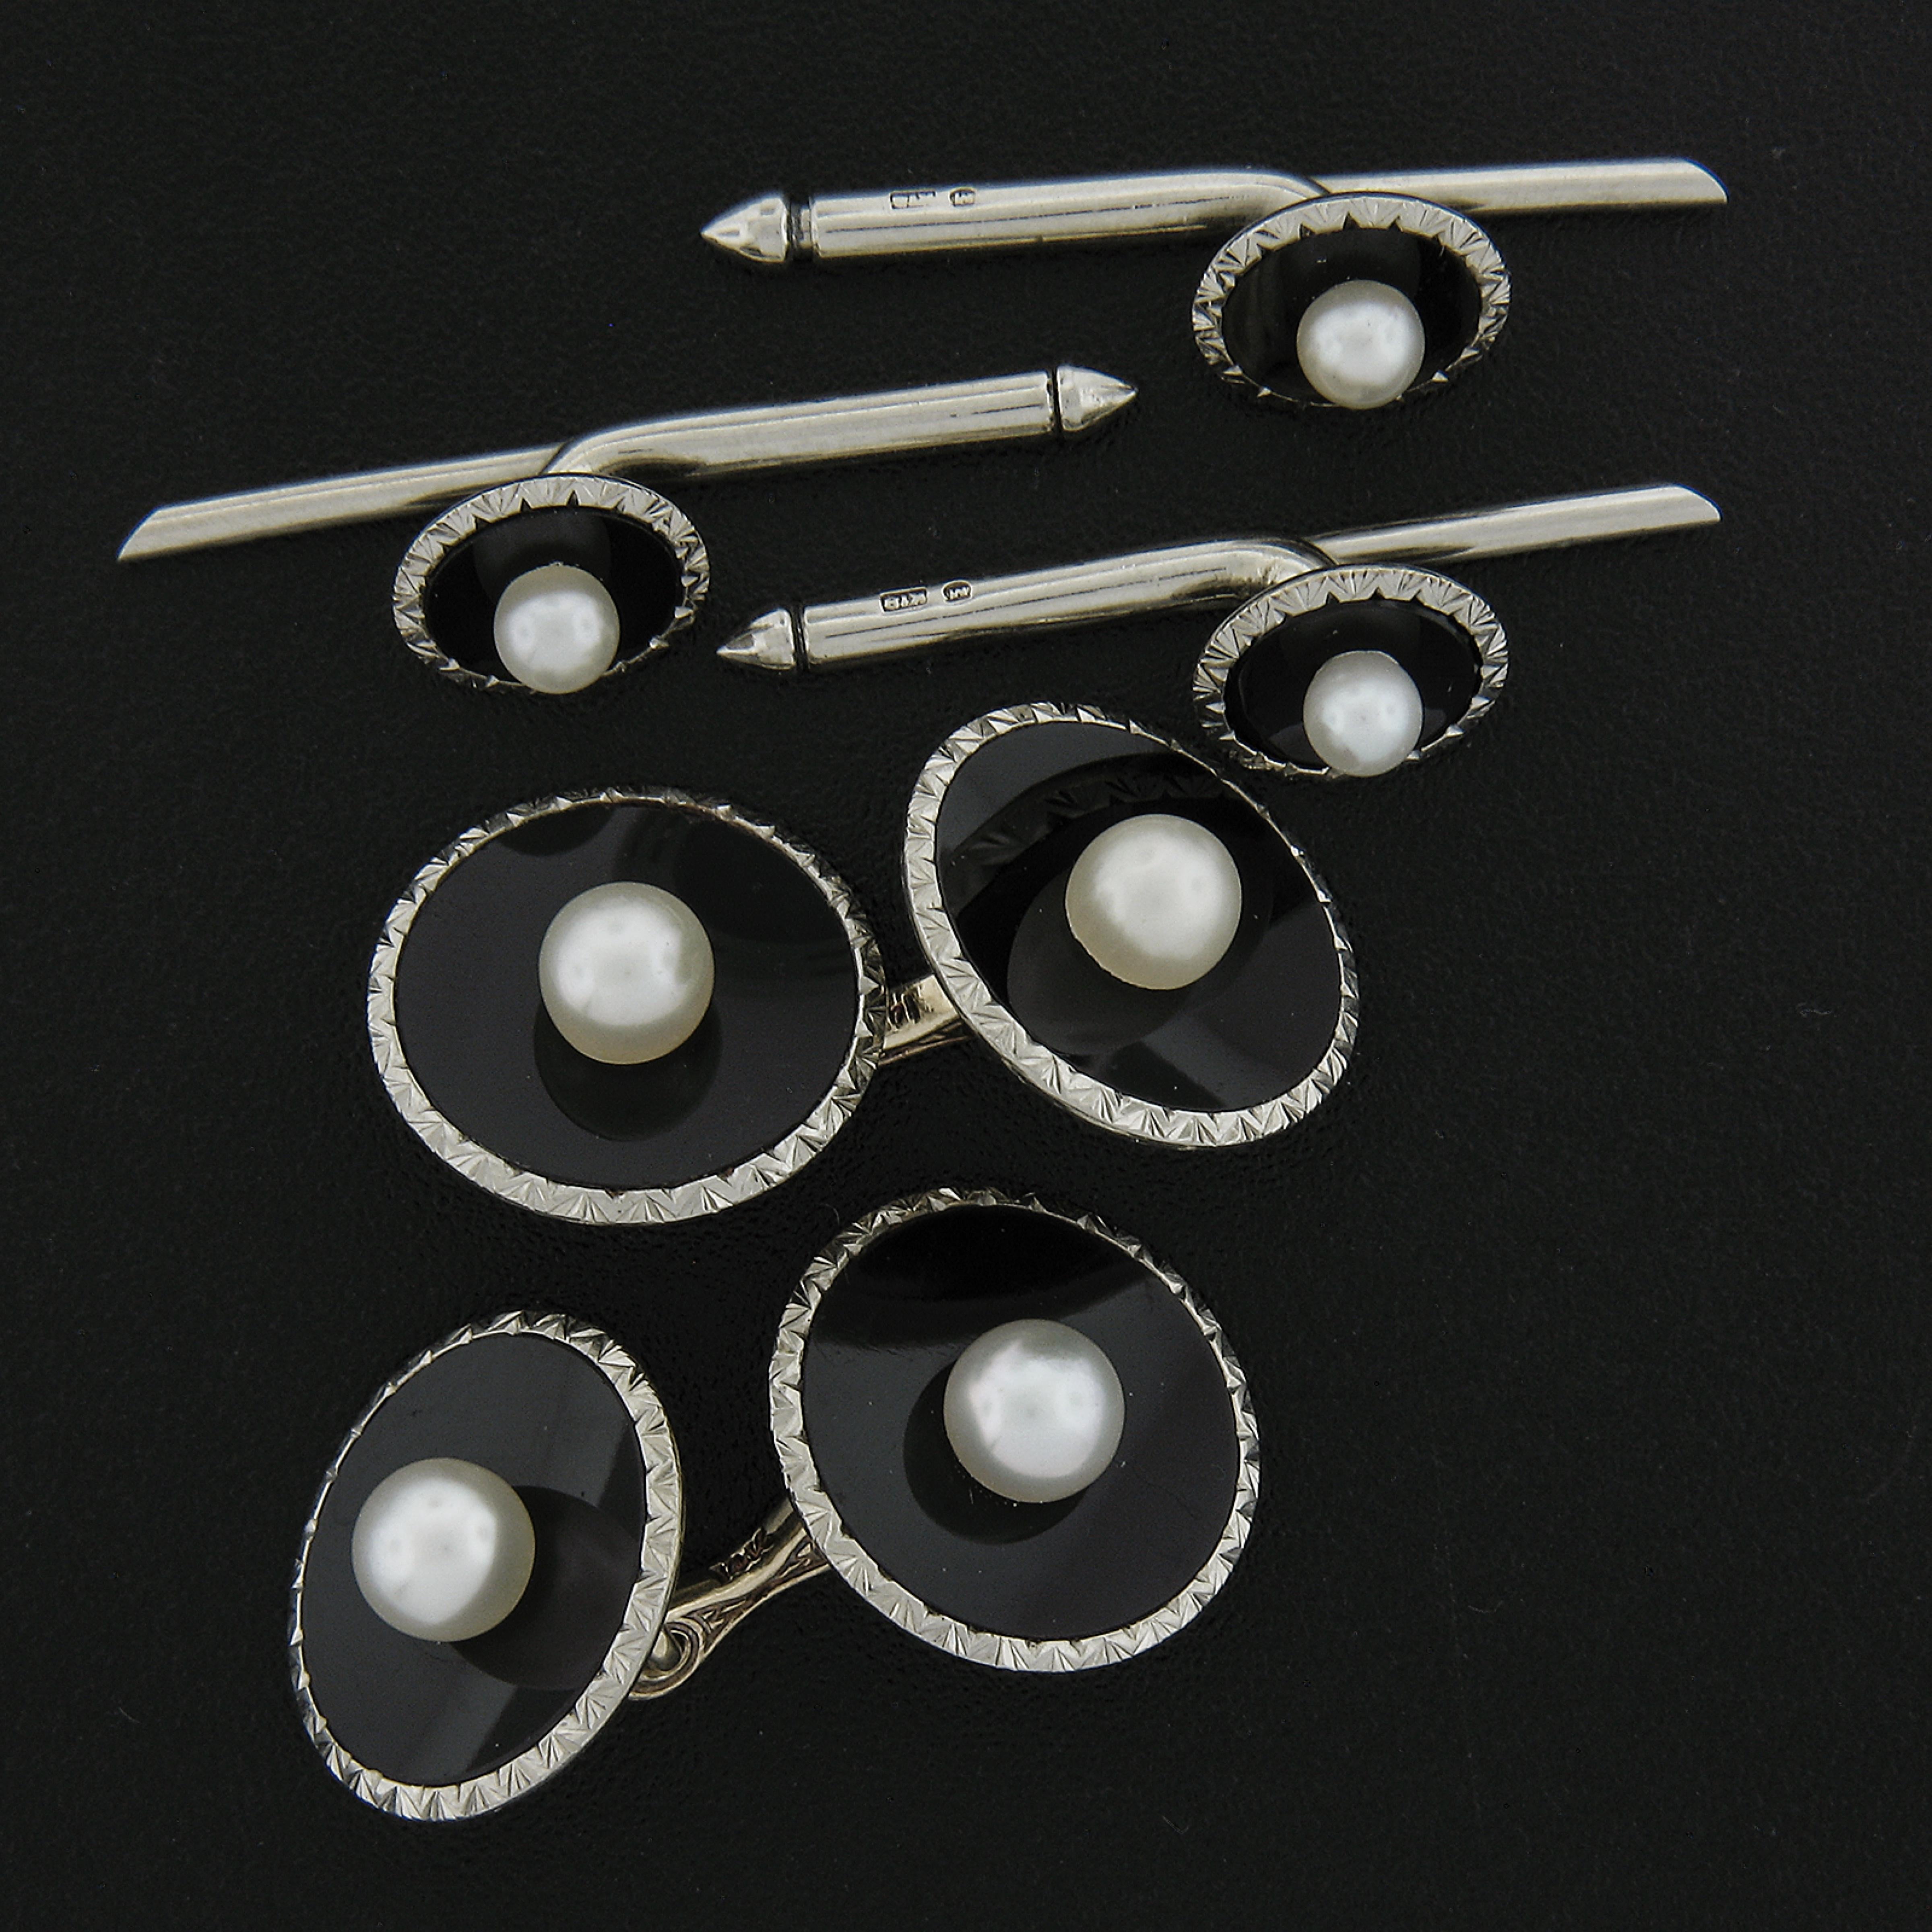 --Stone(s):--
(7) Genuine Cultured Onyx - Round Disk Shape - Bezel Set - Black Color - 7.2mm & 13mm (approx.)
(7) Genuine Cultured Pearls - Round Shape - Fine Luster - White Color - 3.5-5mm (approx.)

Material: Solid 18k White Gold w/ 14k Connecting